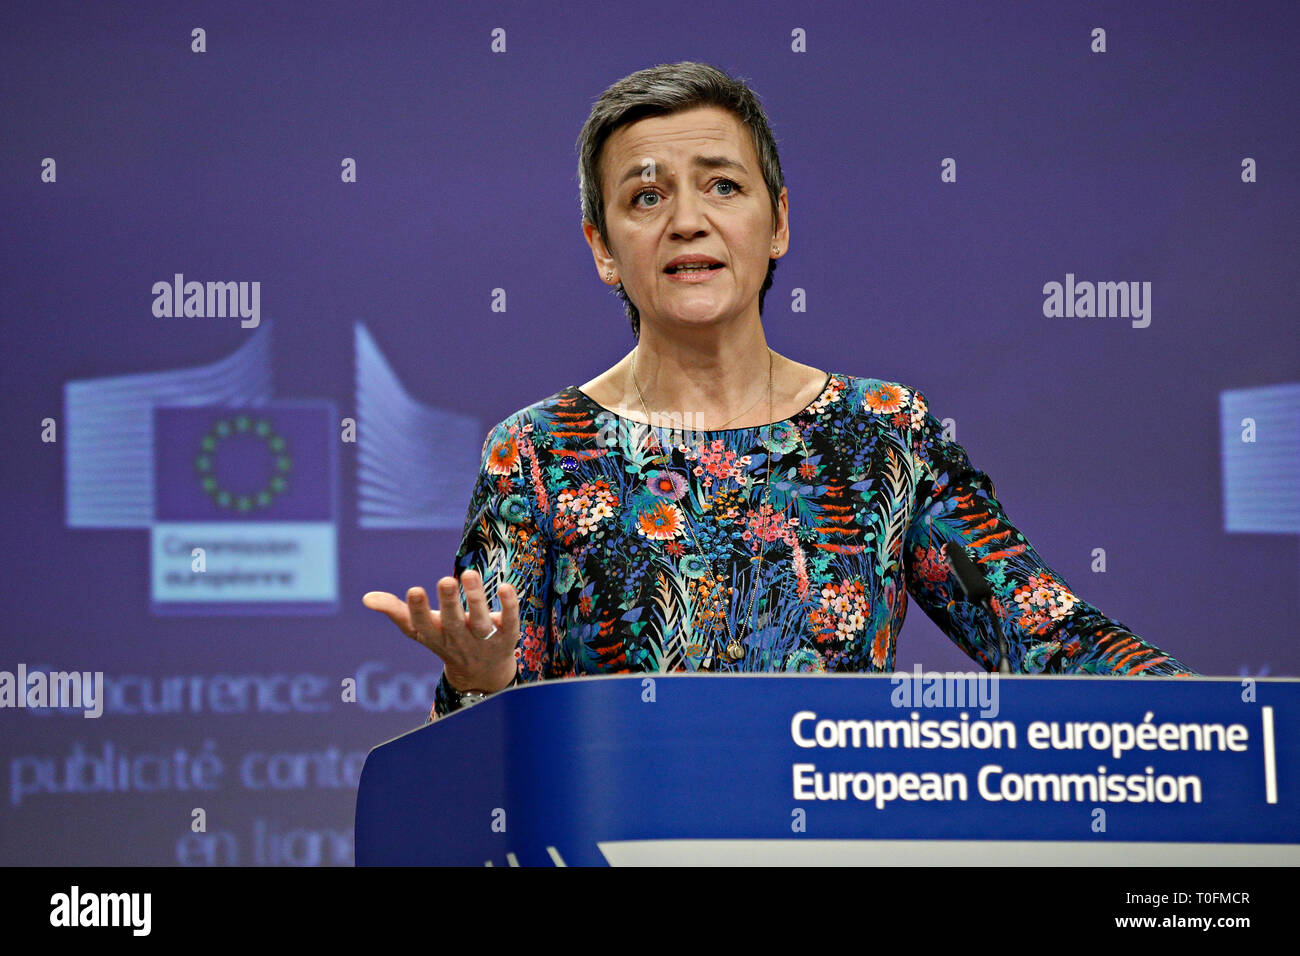 Brussels, Belgium. 20th March 2019.EU Commissioner for Competition  Margrethe Vestager addresses a press conference on the concurrence case  with Google online search advertising . Alexandros Michailidis/Alamy Live  News Stock Photo - Alamy